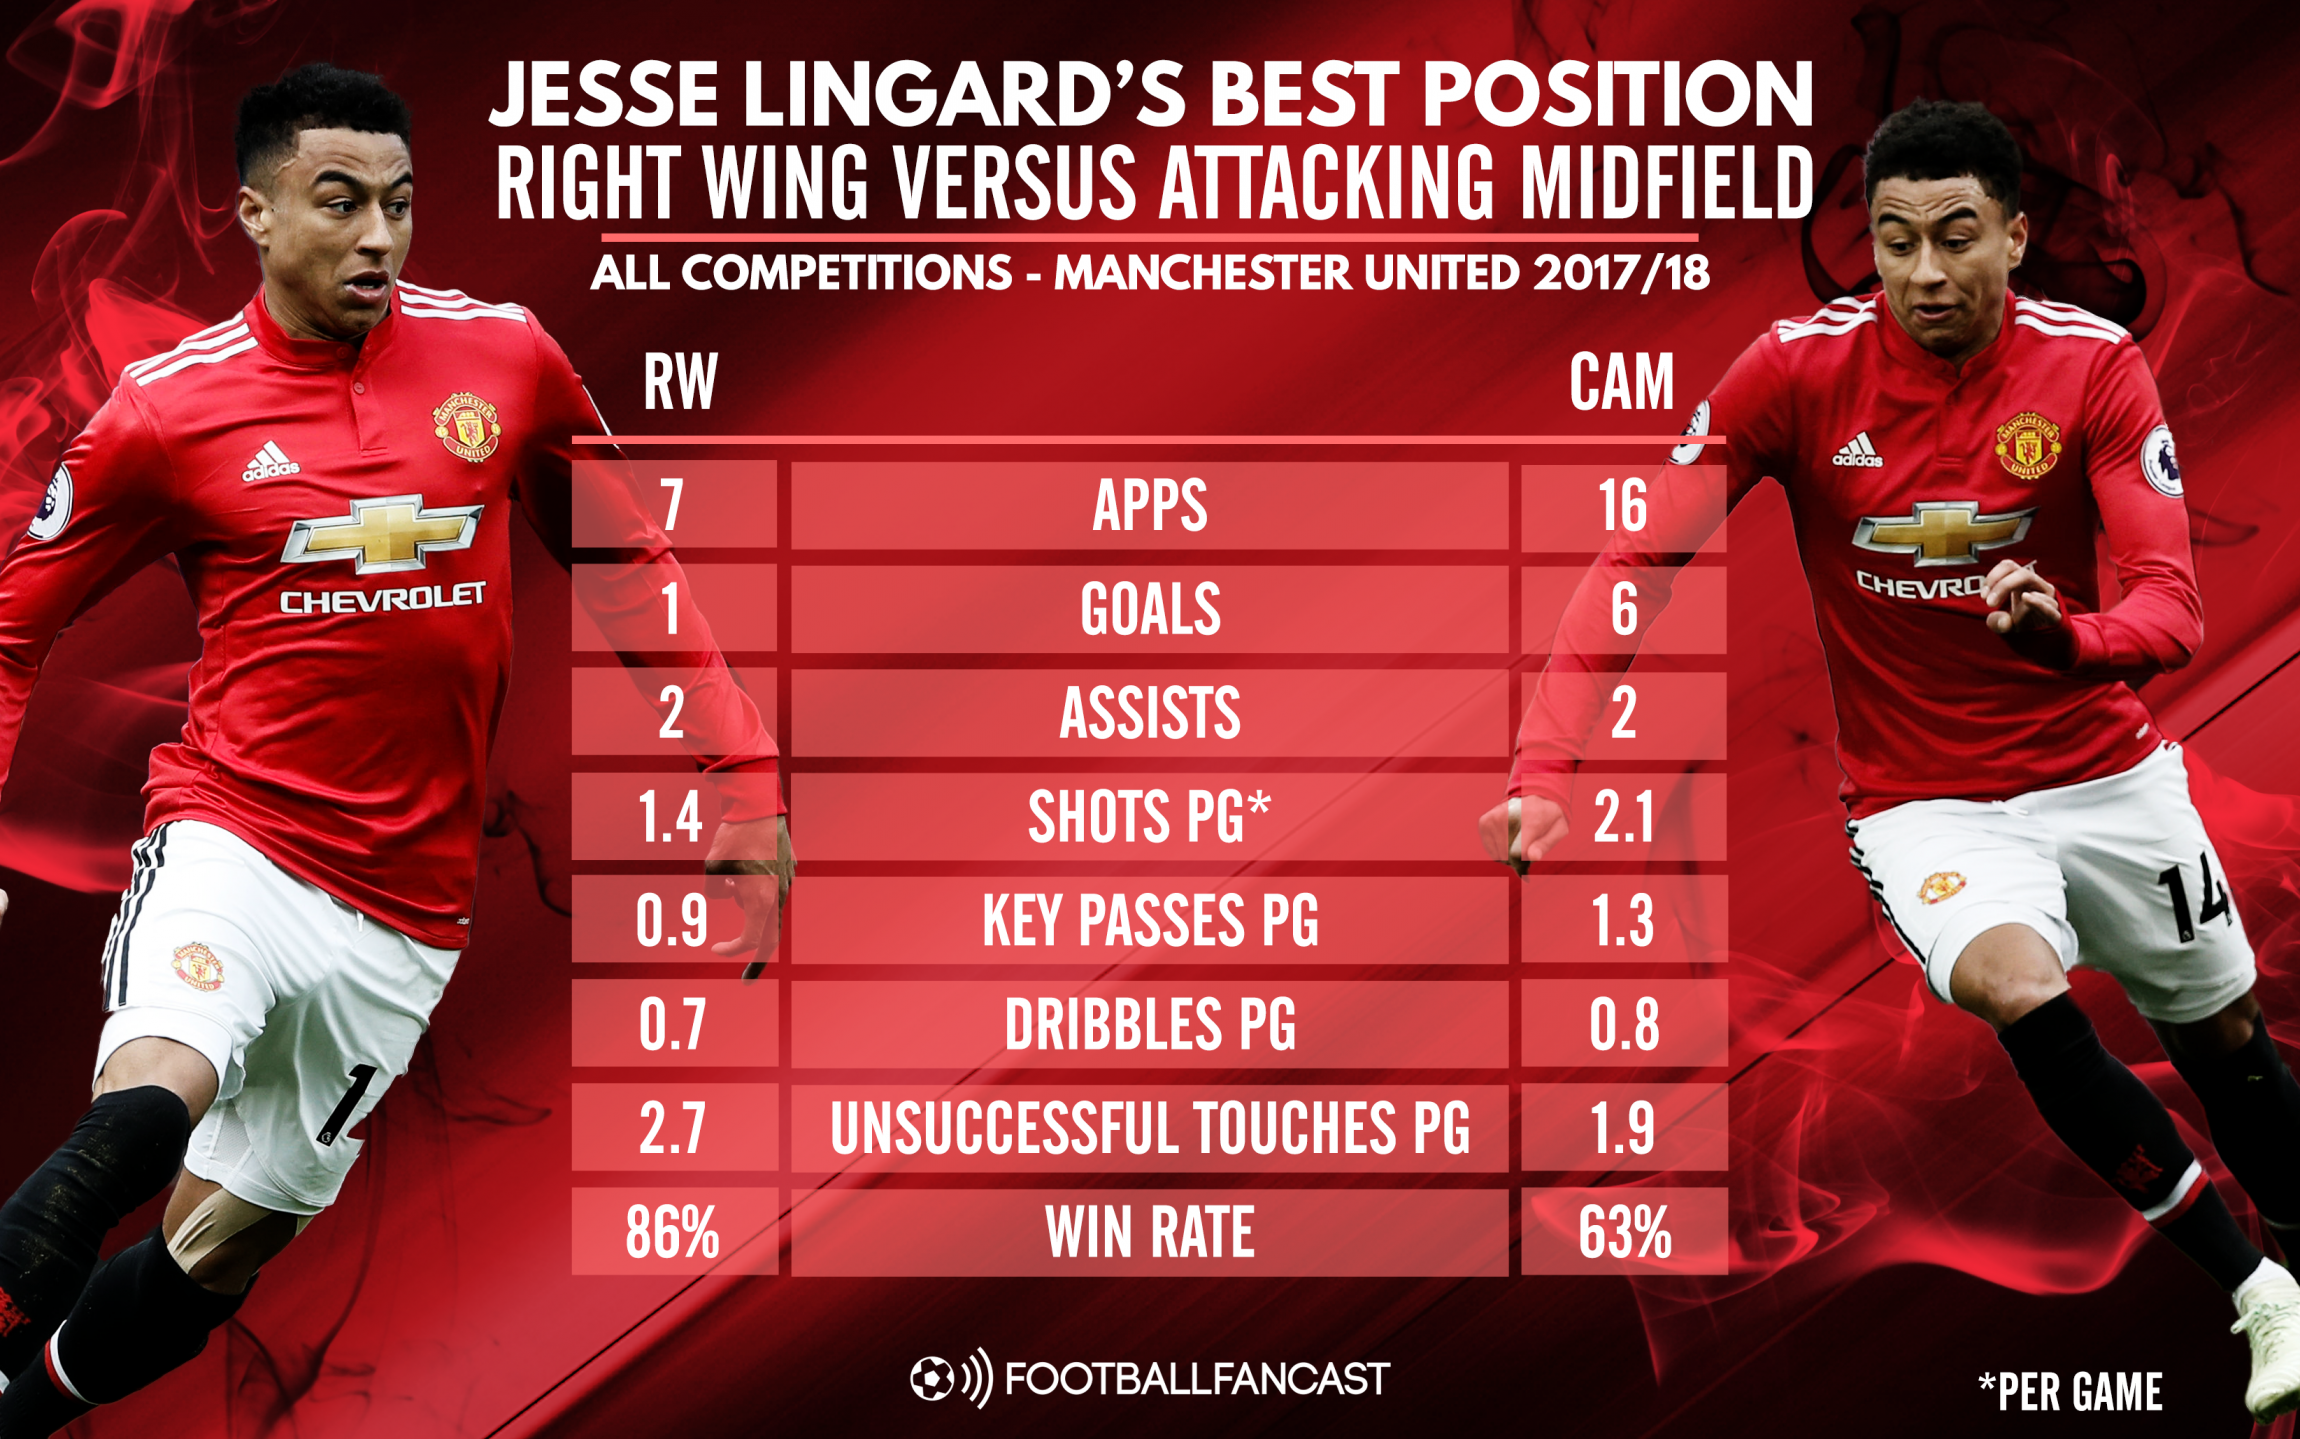 Jesse Lingard's form at Right Wing compared to Attacking Midfield